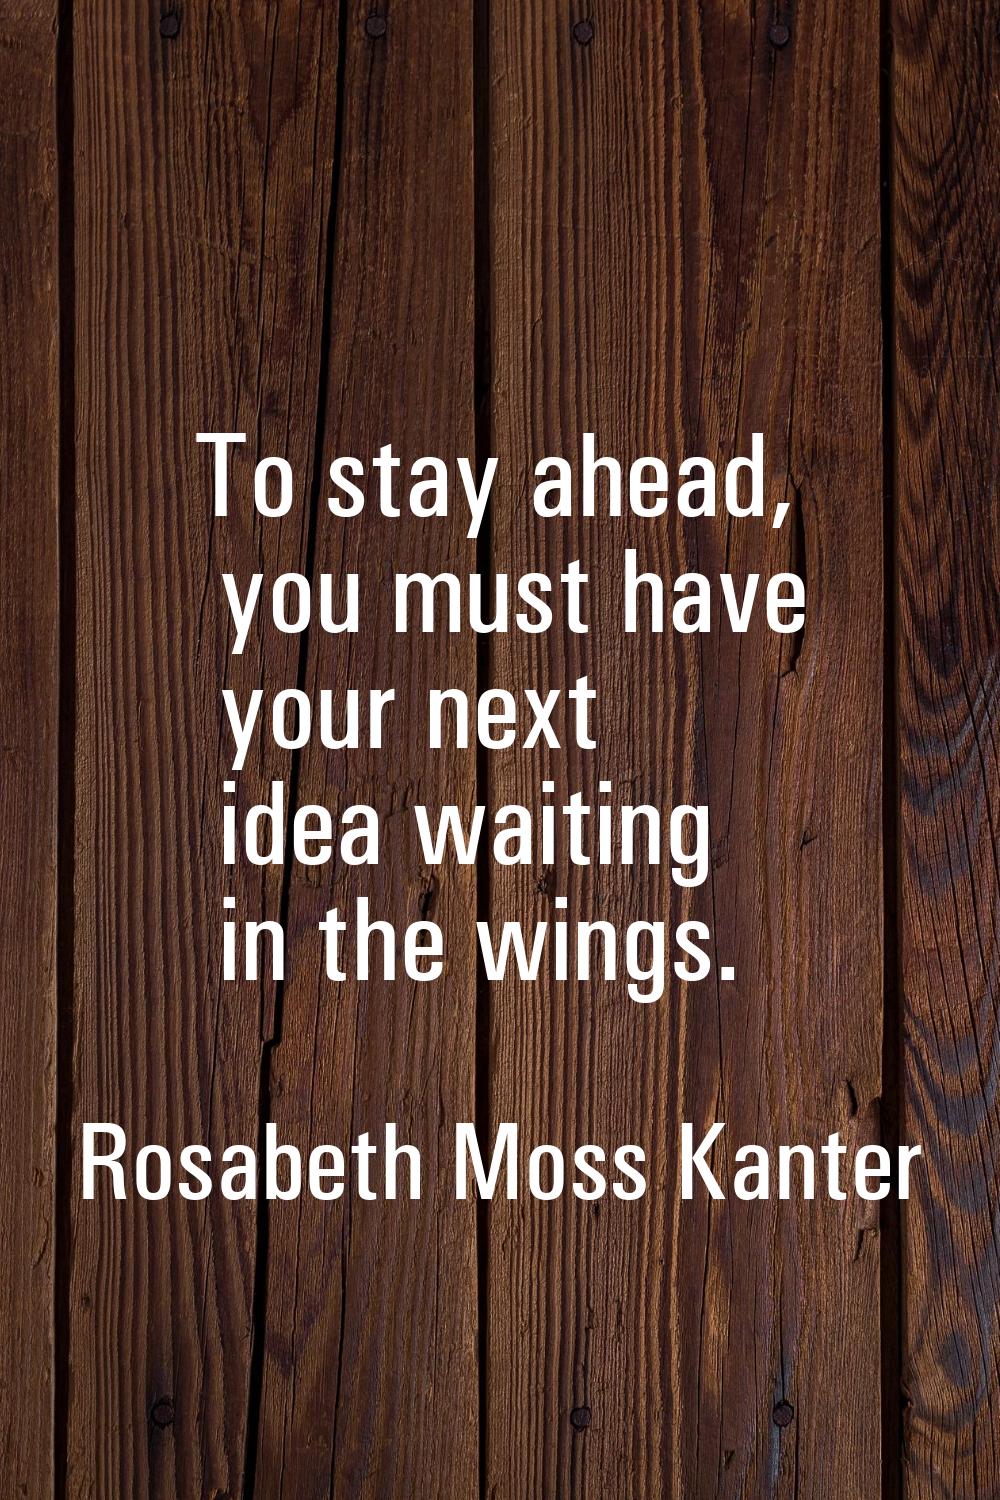 To stay ahead, you must have your next idea waiting in the wings.